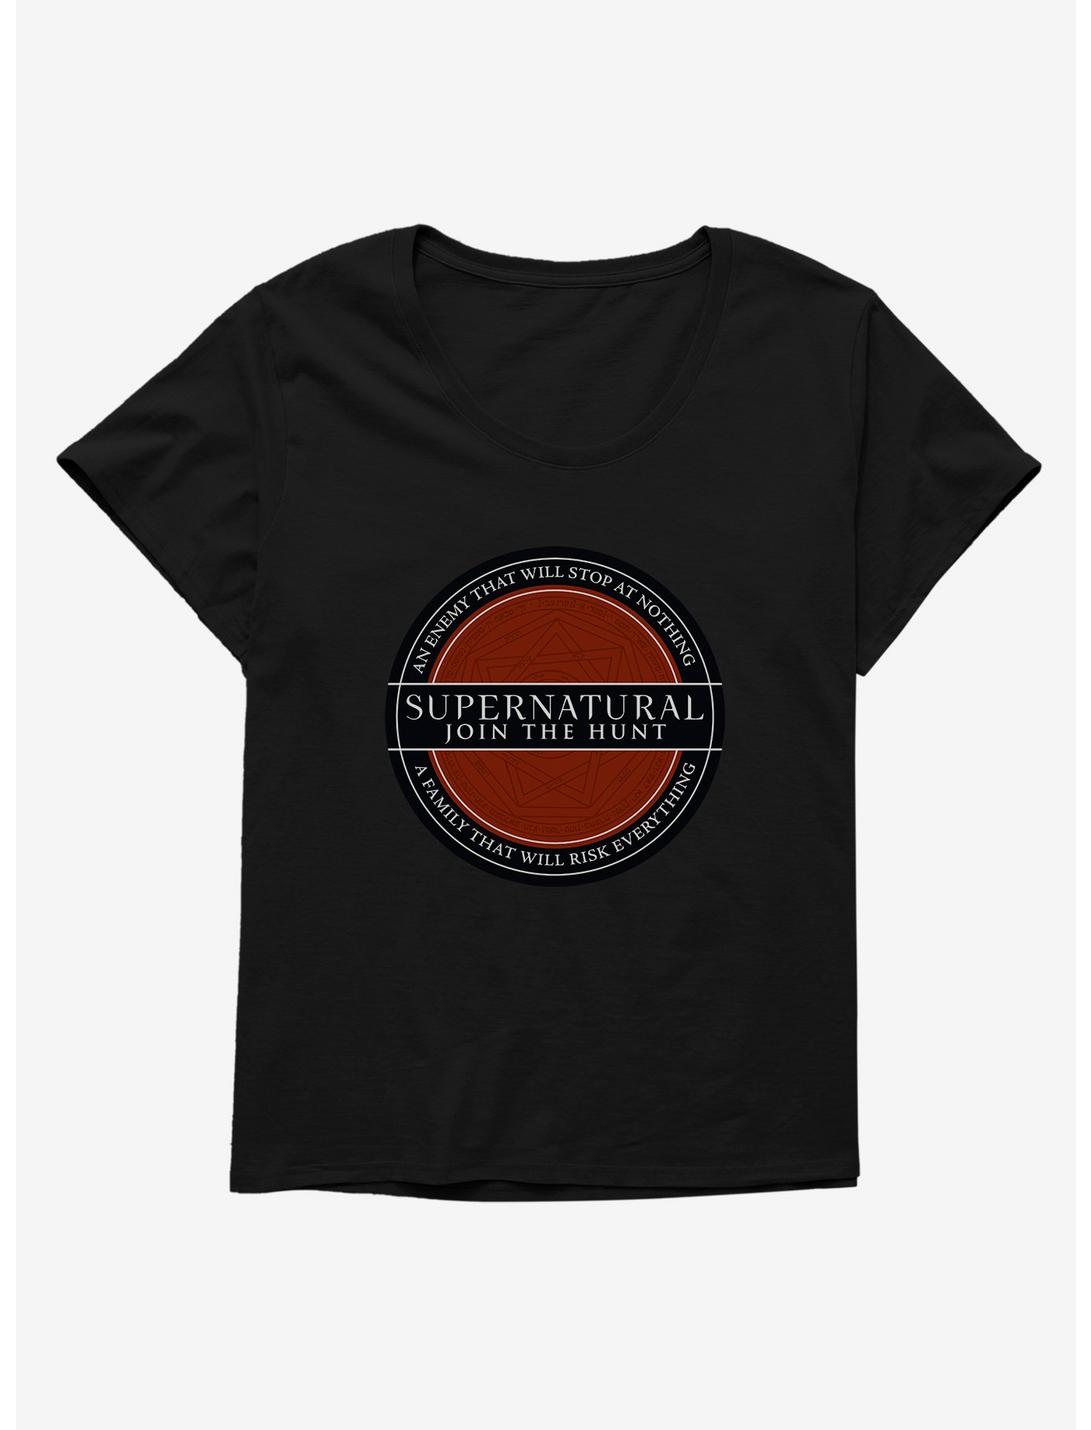 Supernatural Join The Hunt Family Seal Womens T-Shirt Plus Size, , hi-res